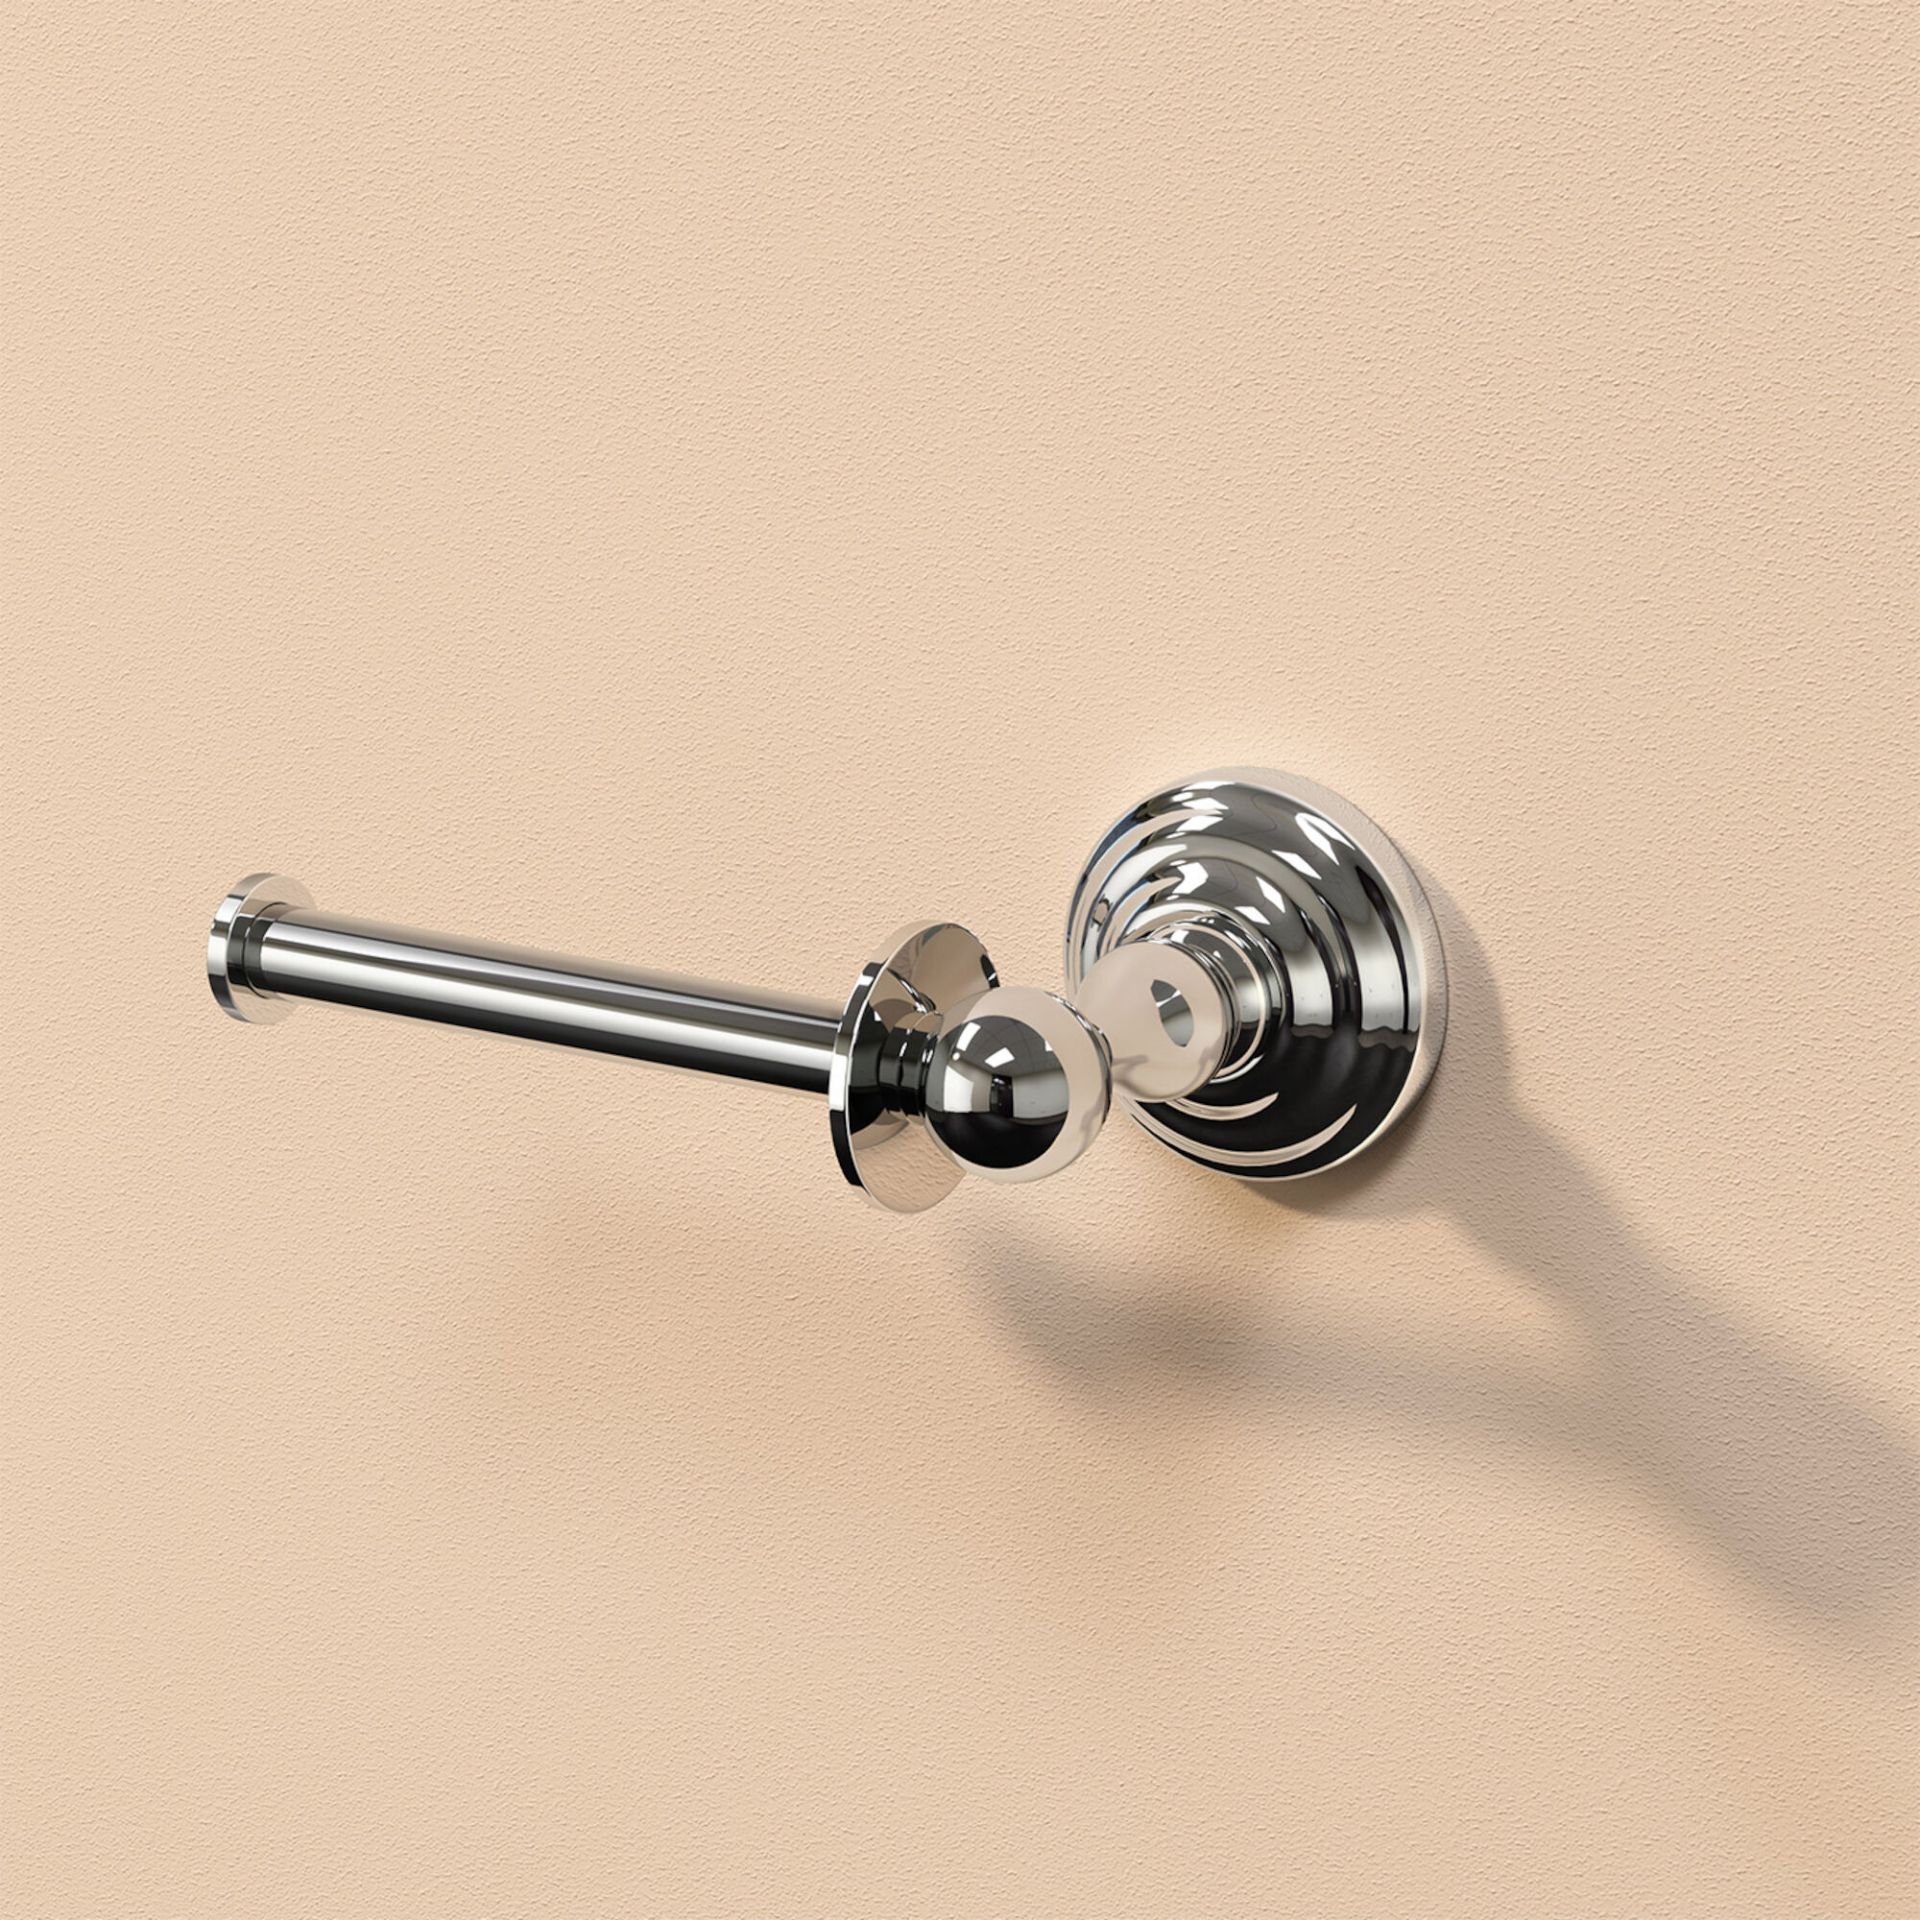 (VZ32) York Toilet Roll Holder Finishes your bathroom with a little extra functionality and style